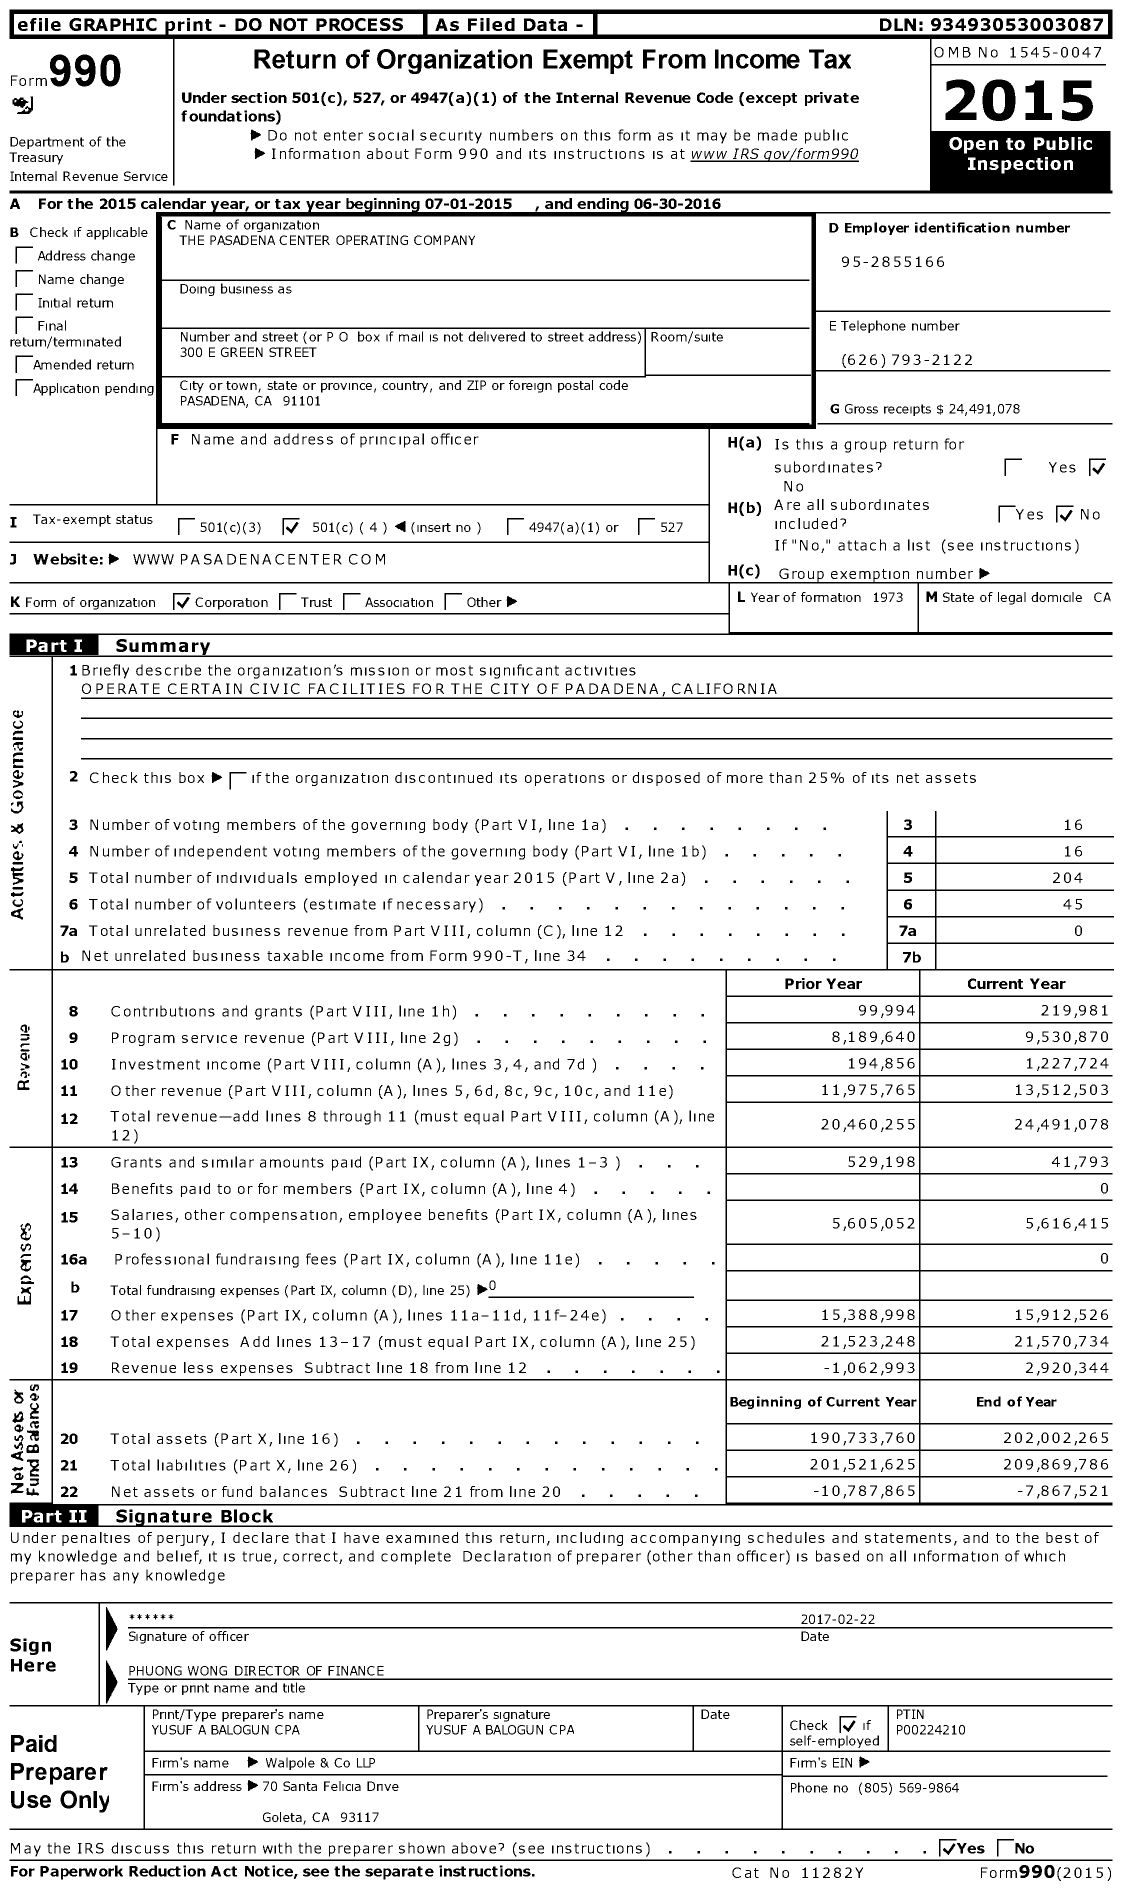 Image of first page of 2015 Form 990O for The Pasadena Center Operating Company